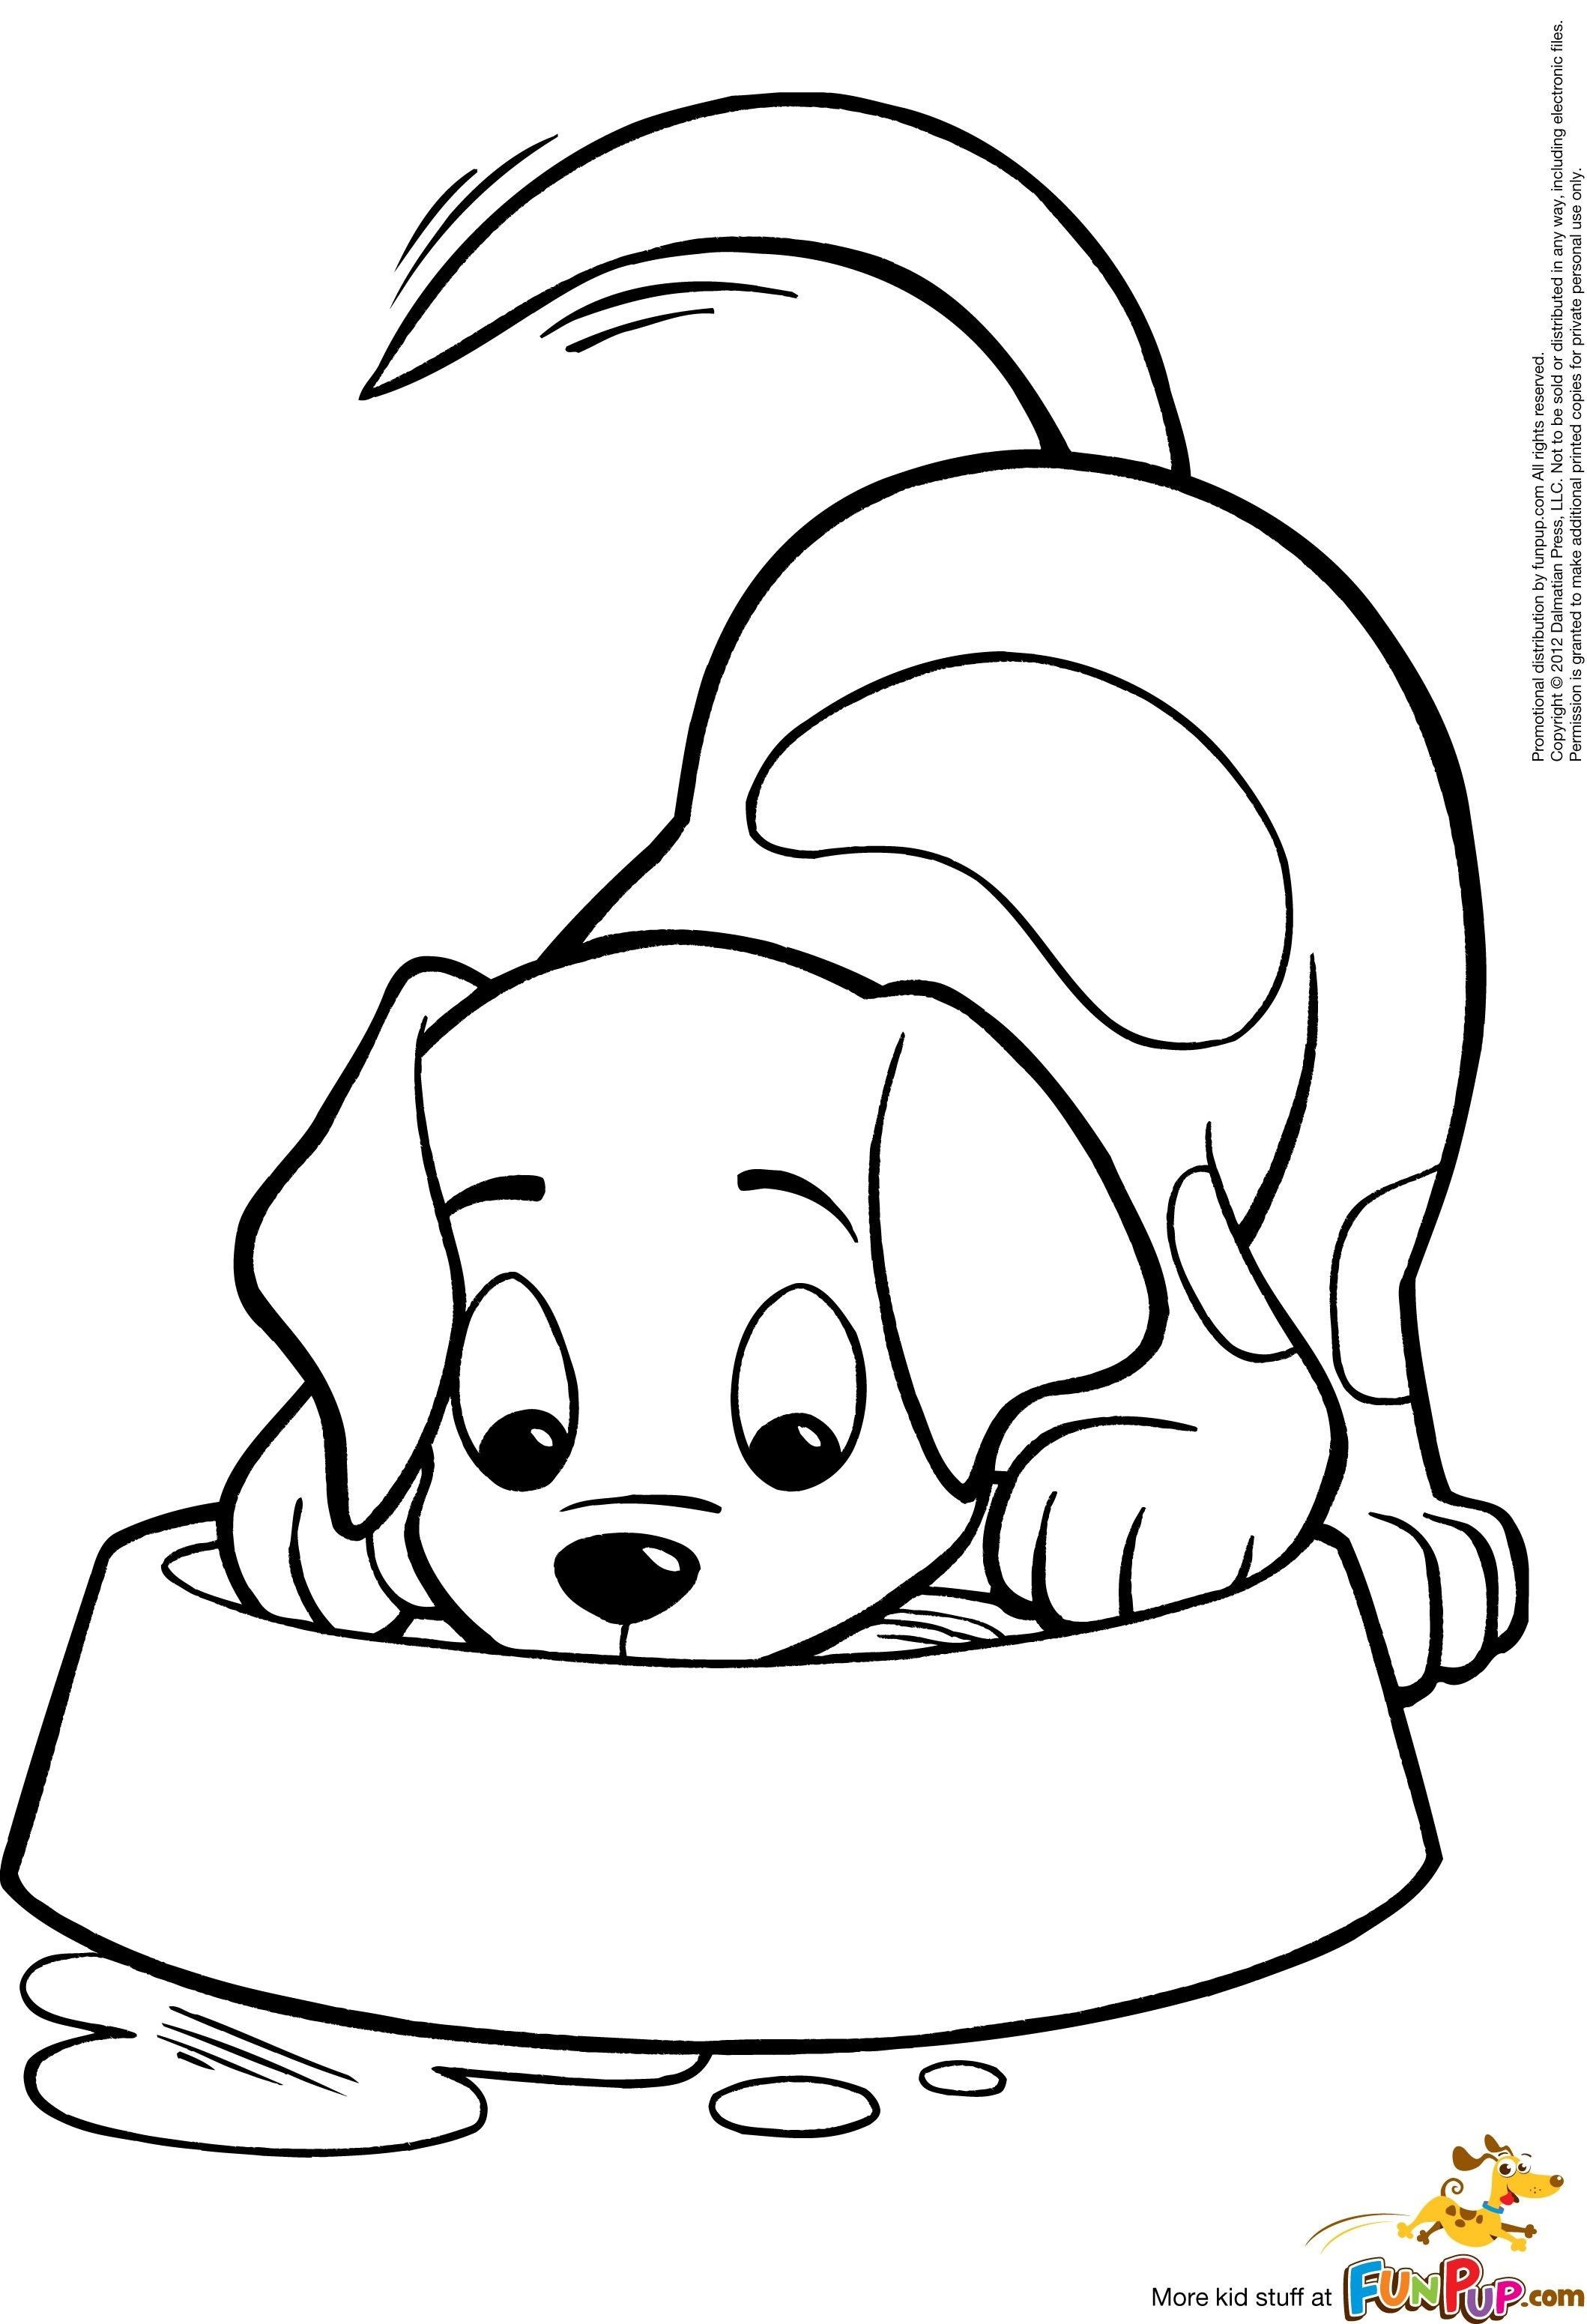 Coloring Pages Of Puppies to Print